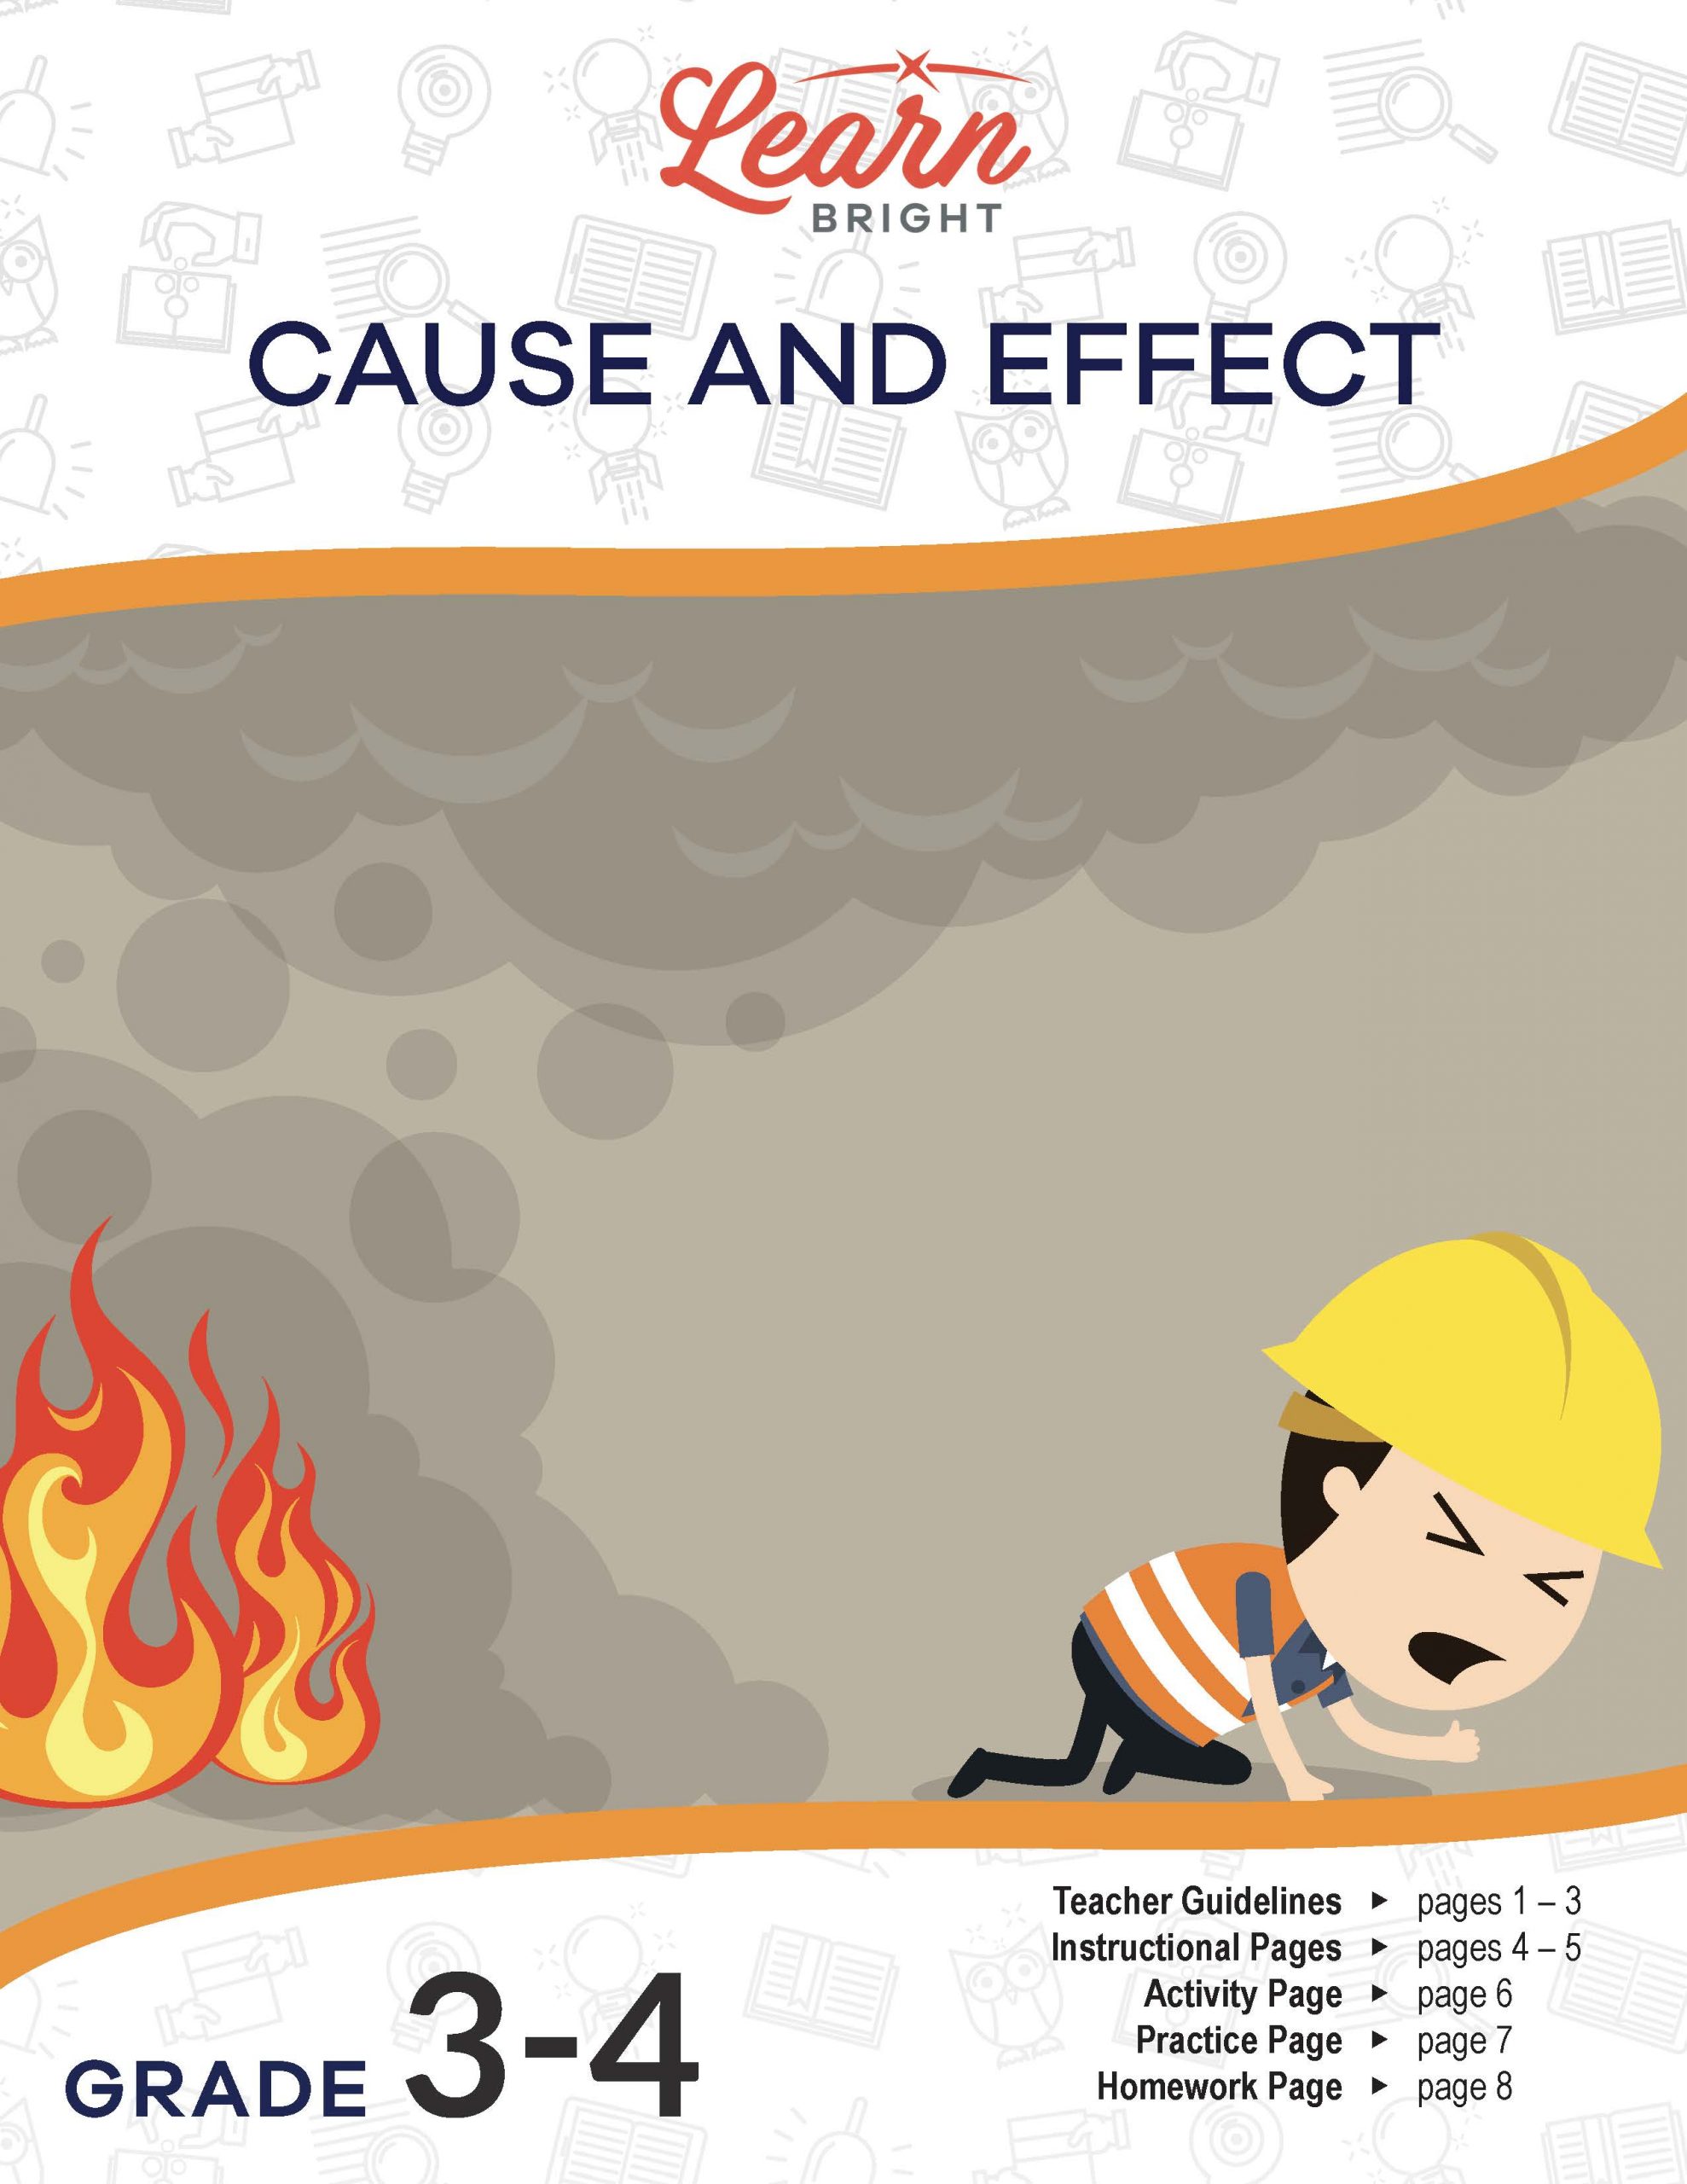 Boy caught in fire on title page of our cause and effect lesson plan